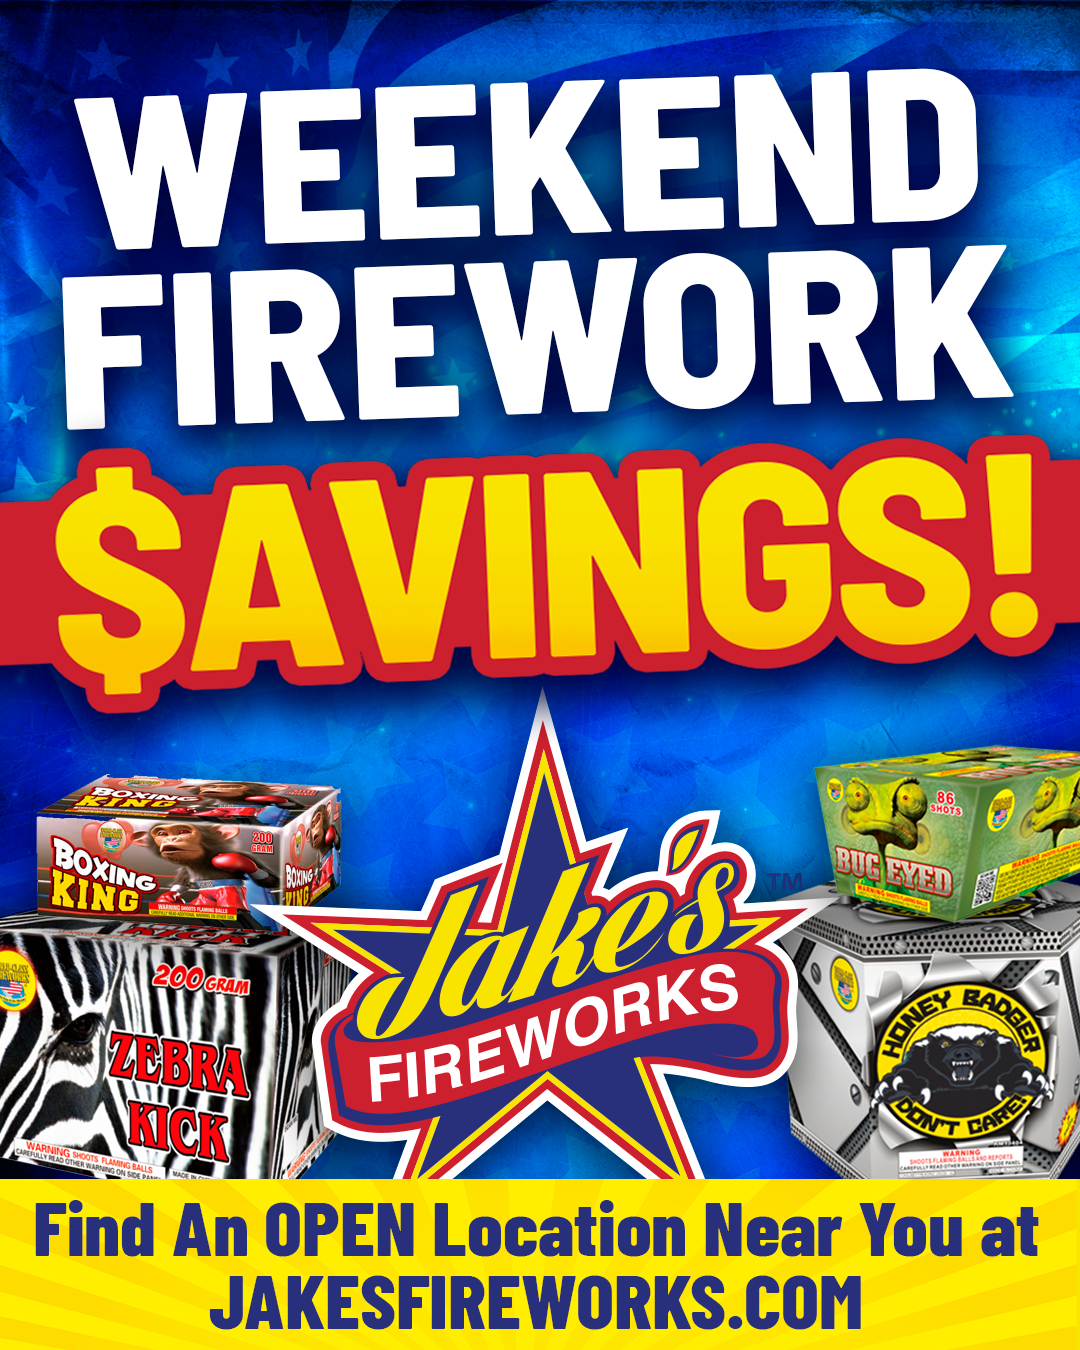 $25 Off Artillery and $5 Off Any Item Coupons